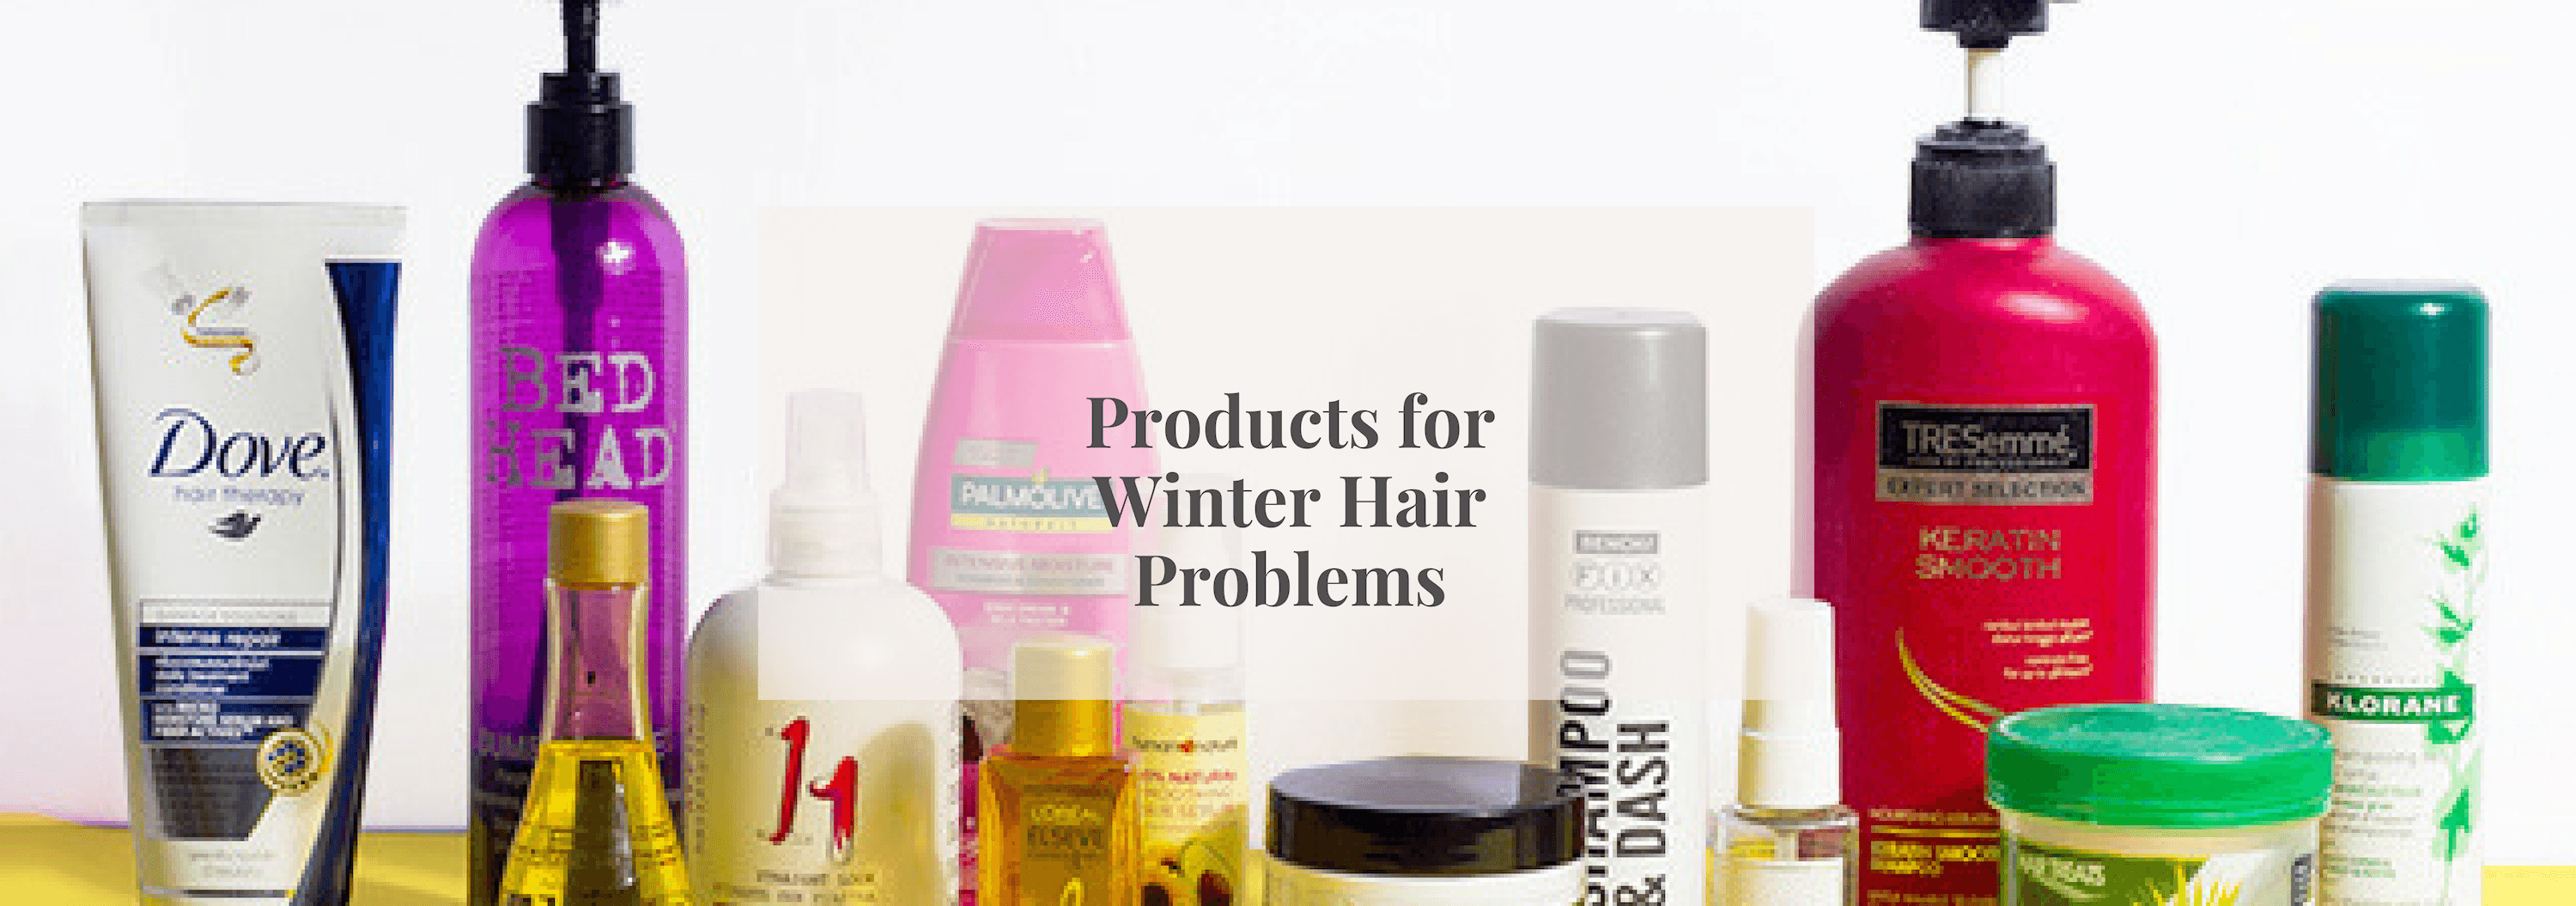 Products for Winter Hair Problems - Numi